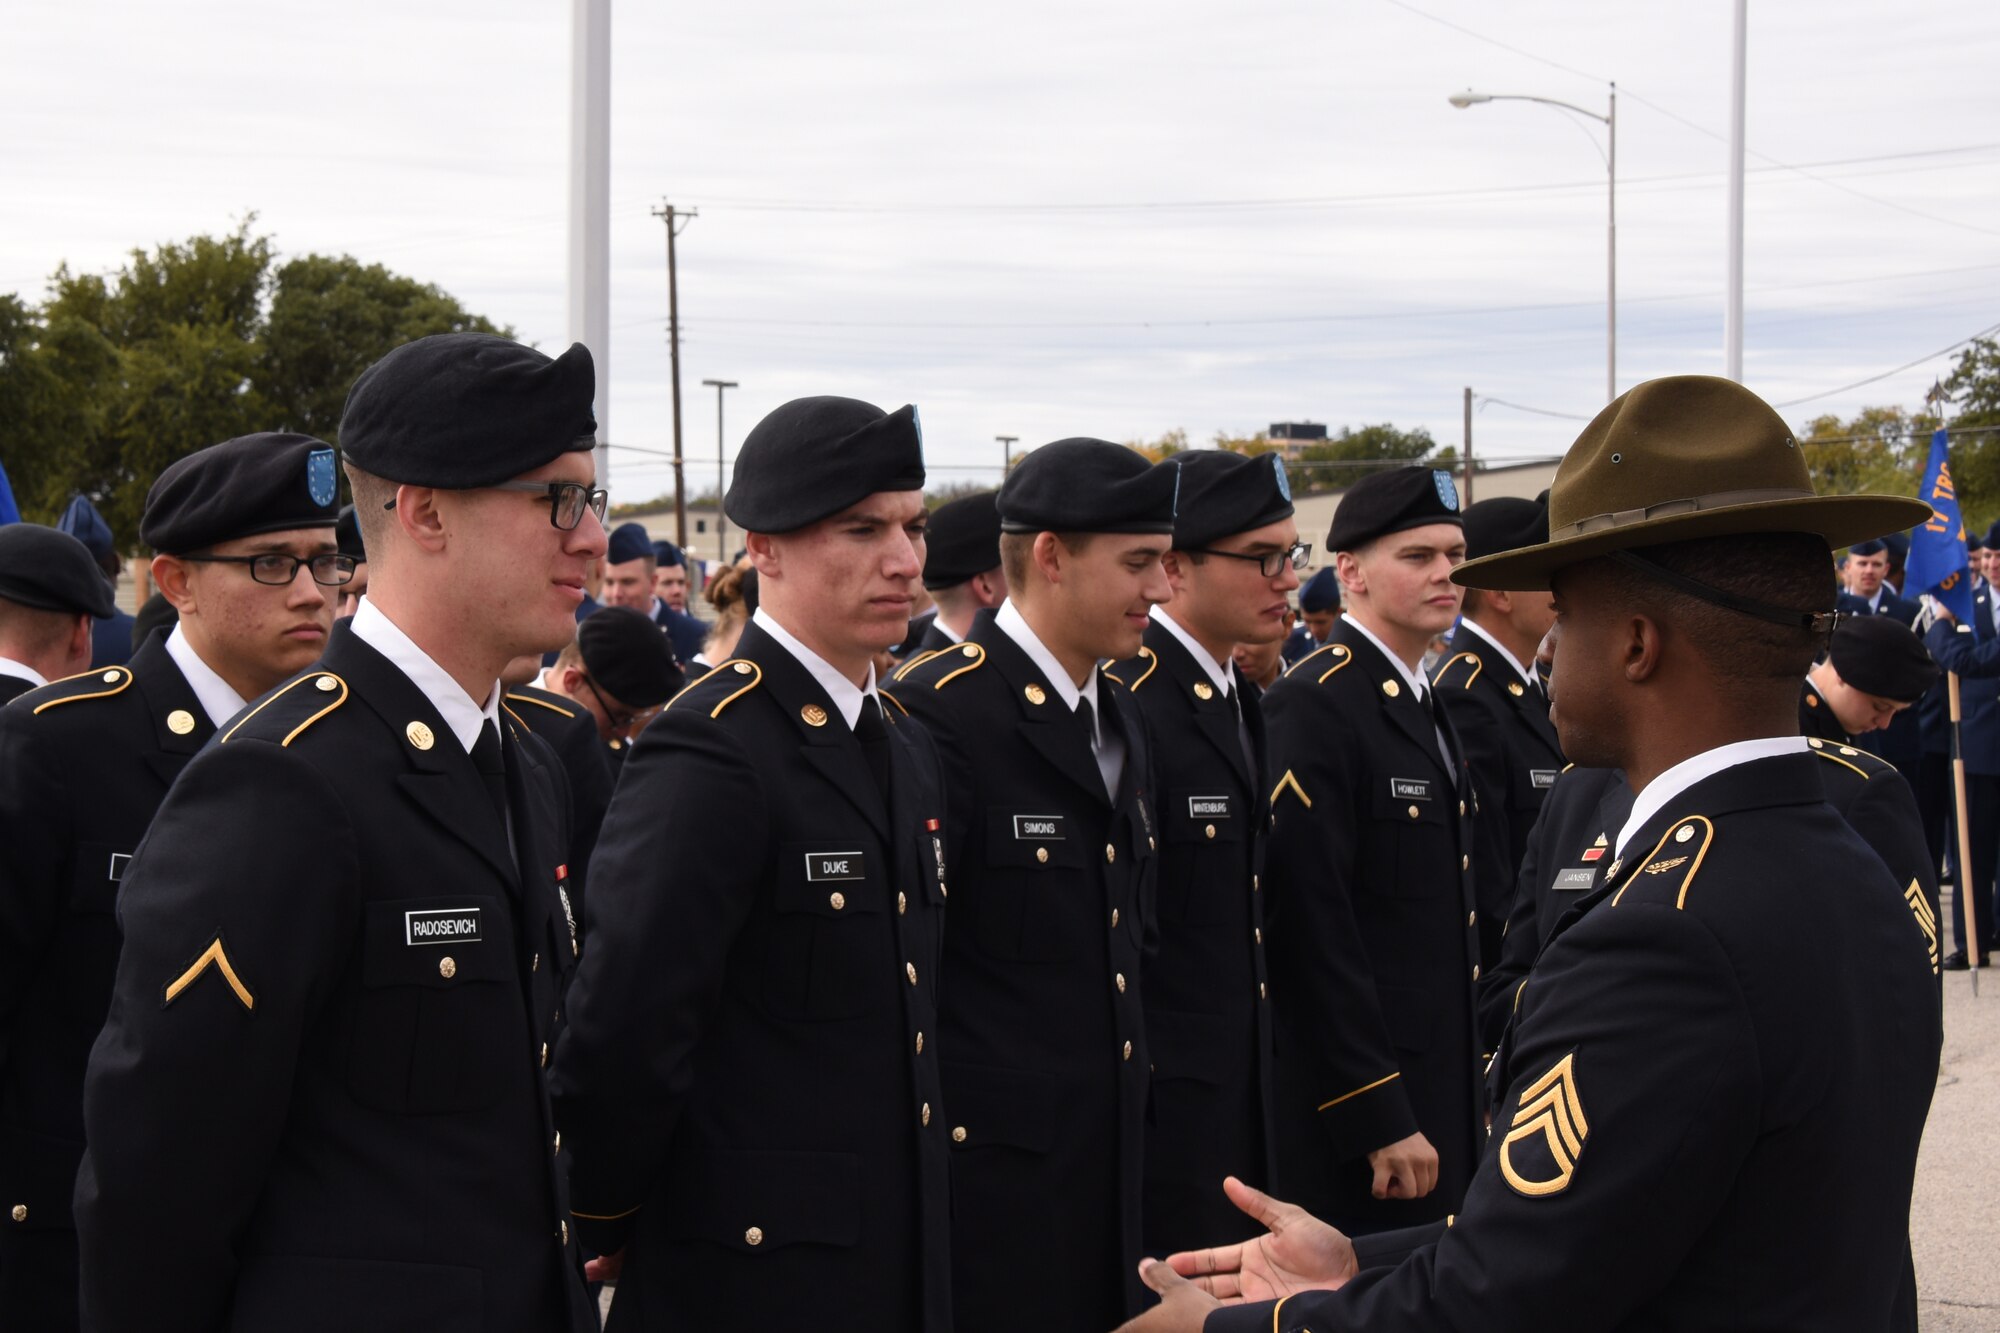 U.S. Army Staff Sgt. Brandon Lee, 344th Military Intelligence Battalion instructor, speaks to students before the Veterans Day Parade in San Angelo, Texas, Nov. 10, 2018. Members of the 344th MI BN joined the other organizations of Goodfellow to march and show support for those who have served and still serve. (U.S. Air Force photo by Airman 1st Class Zachary Chapman/Released)